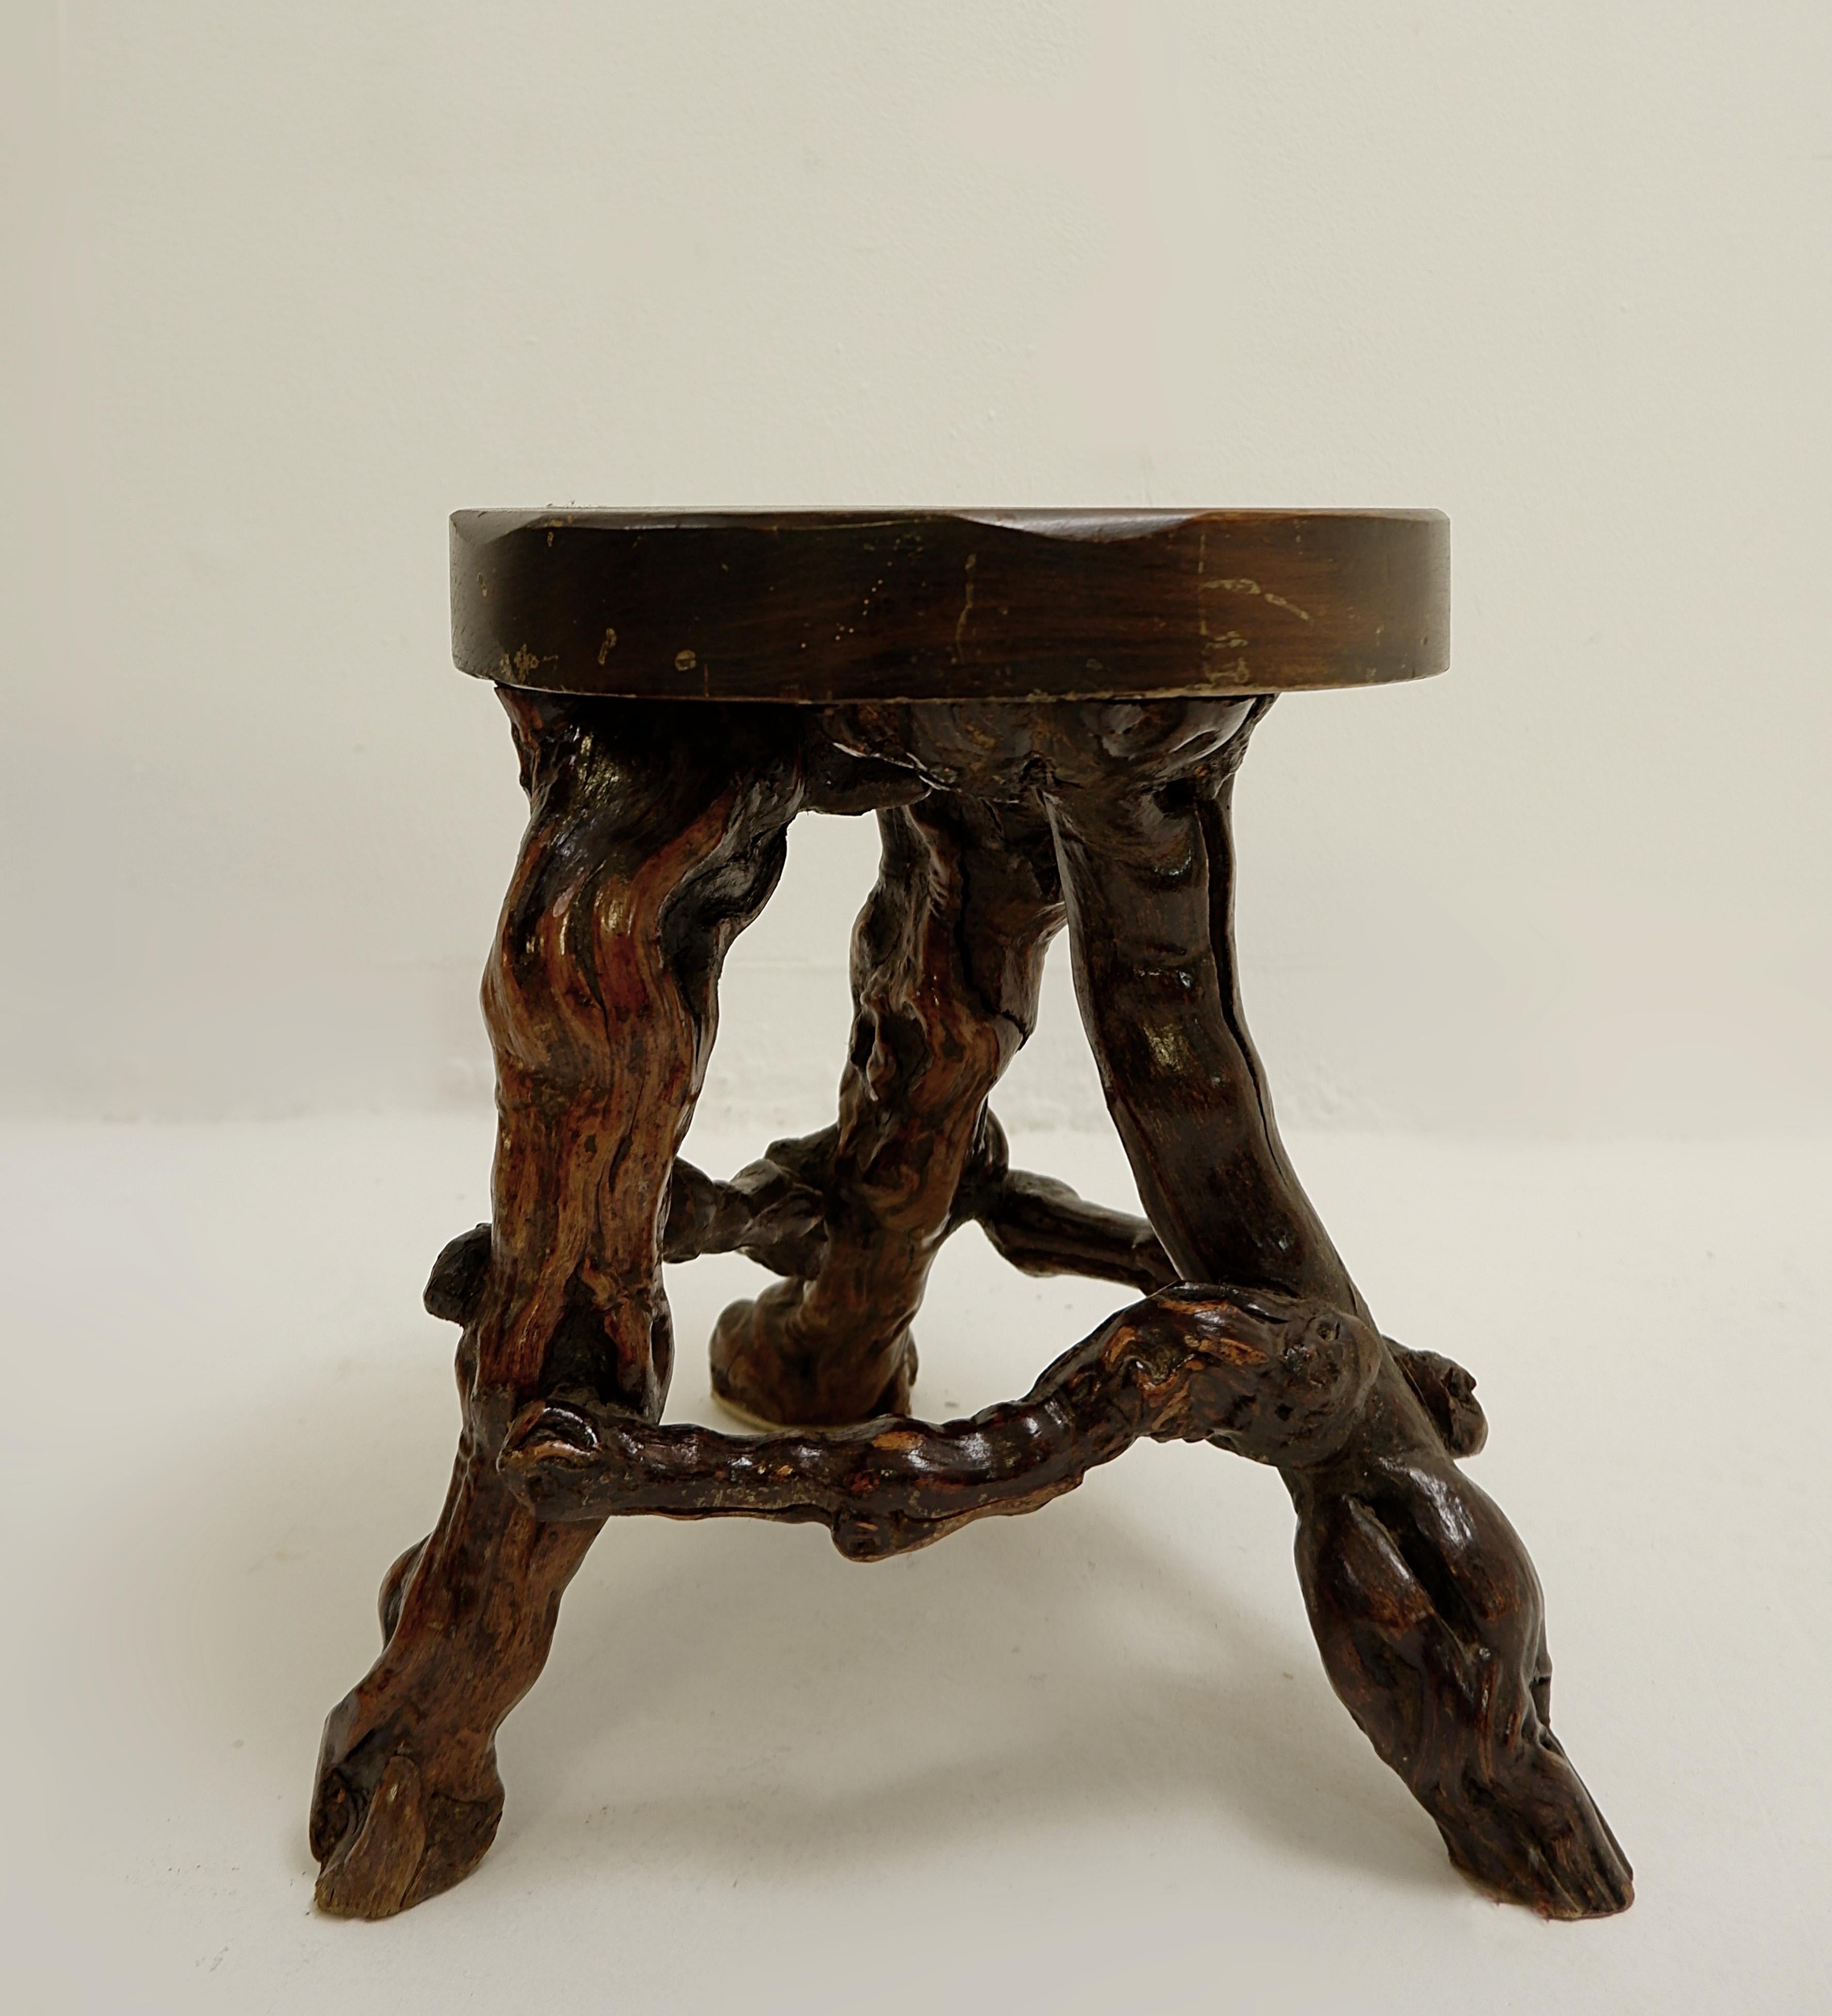 Wood Primitive Set Tabls/Stools with Round Slab Seat and Legs Constructed from Vines For Sale